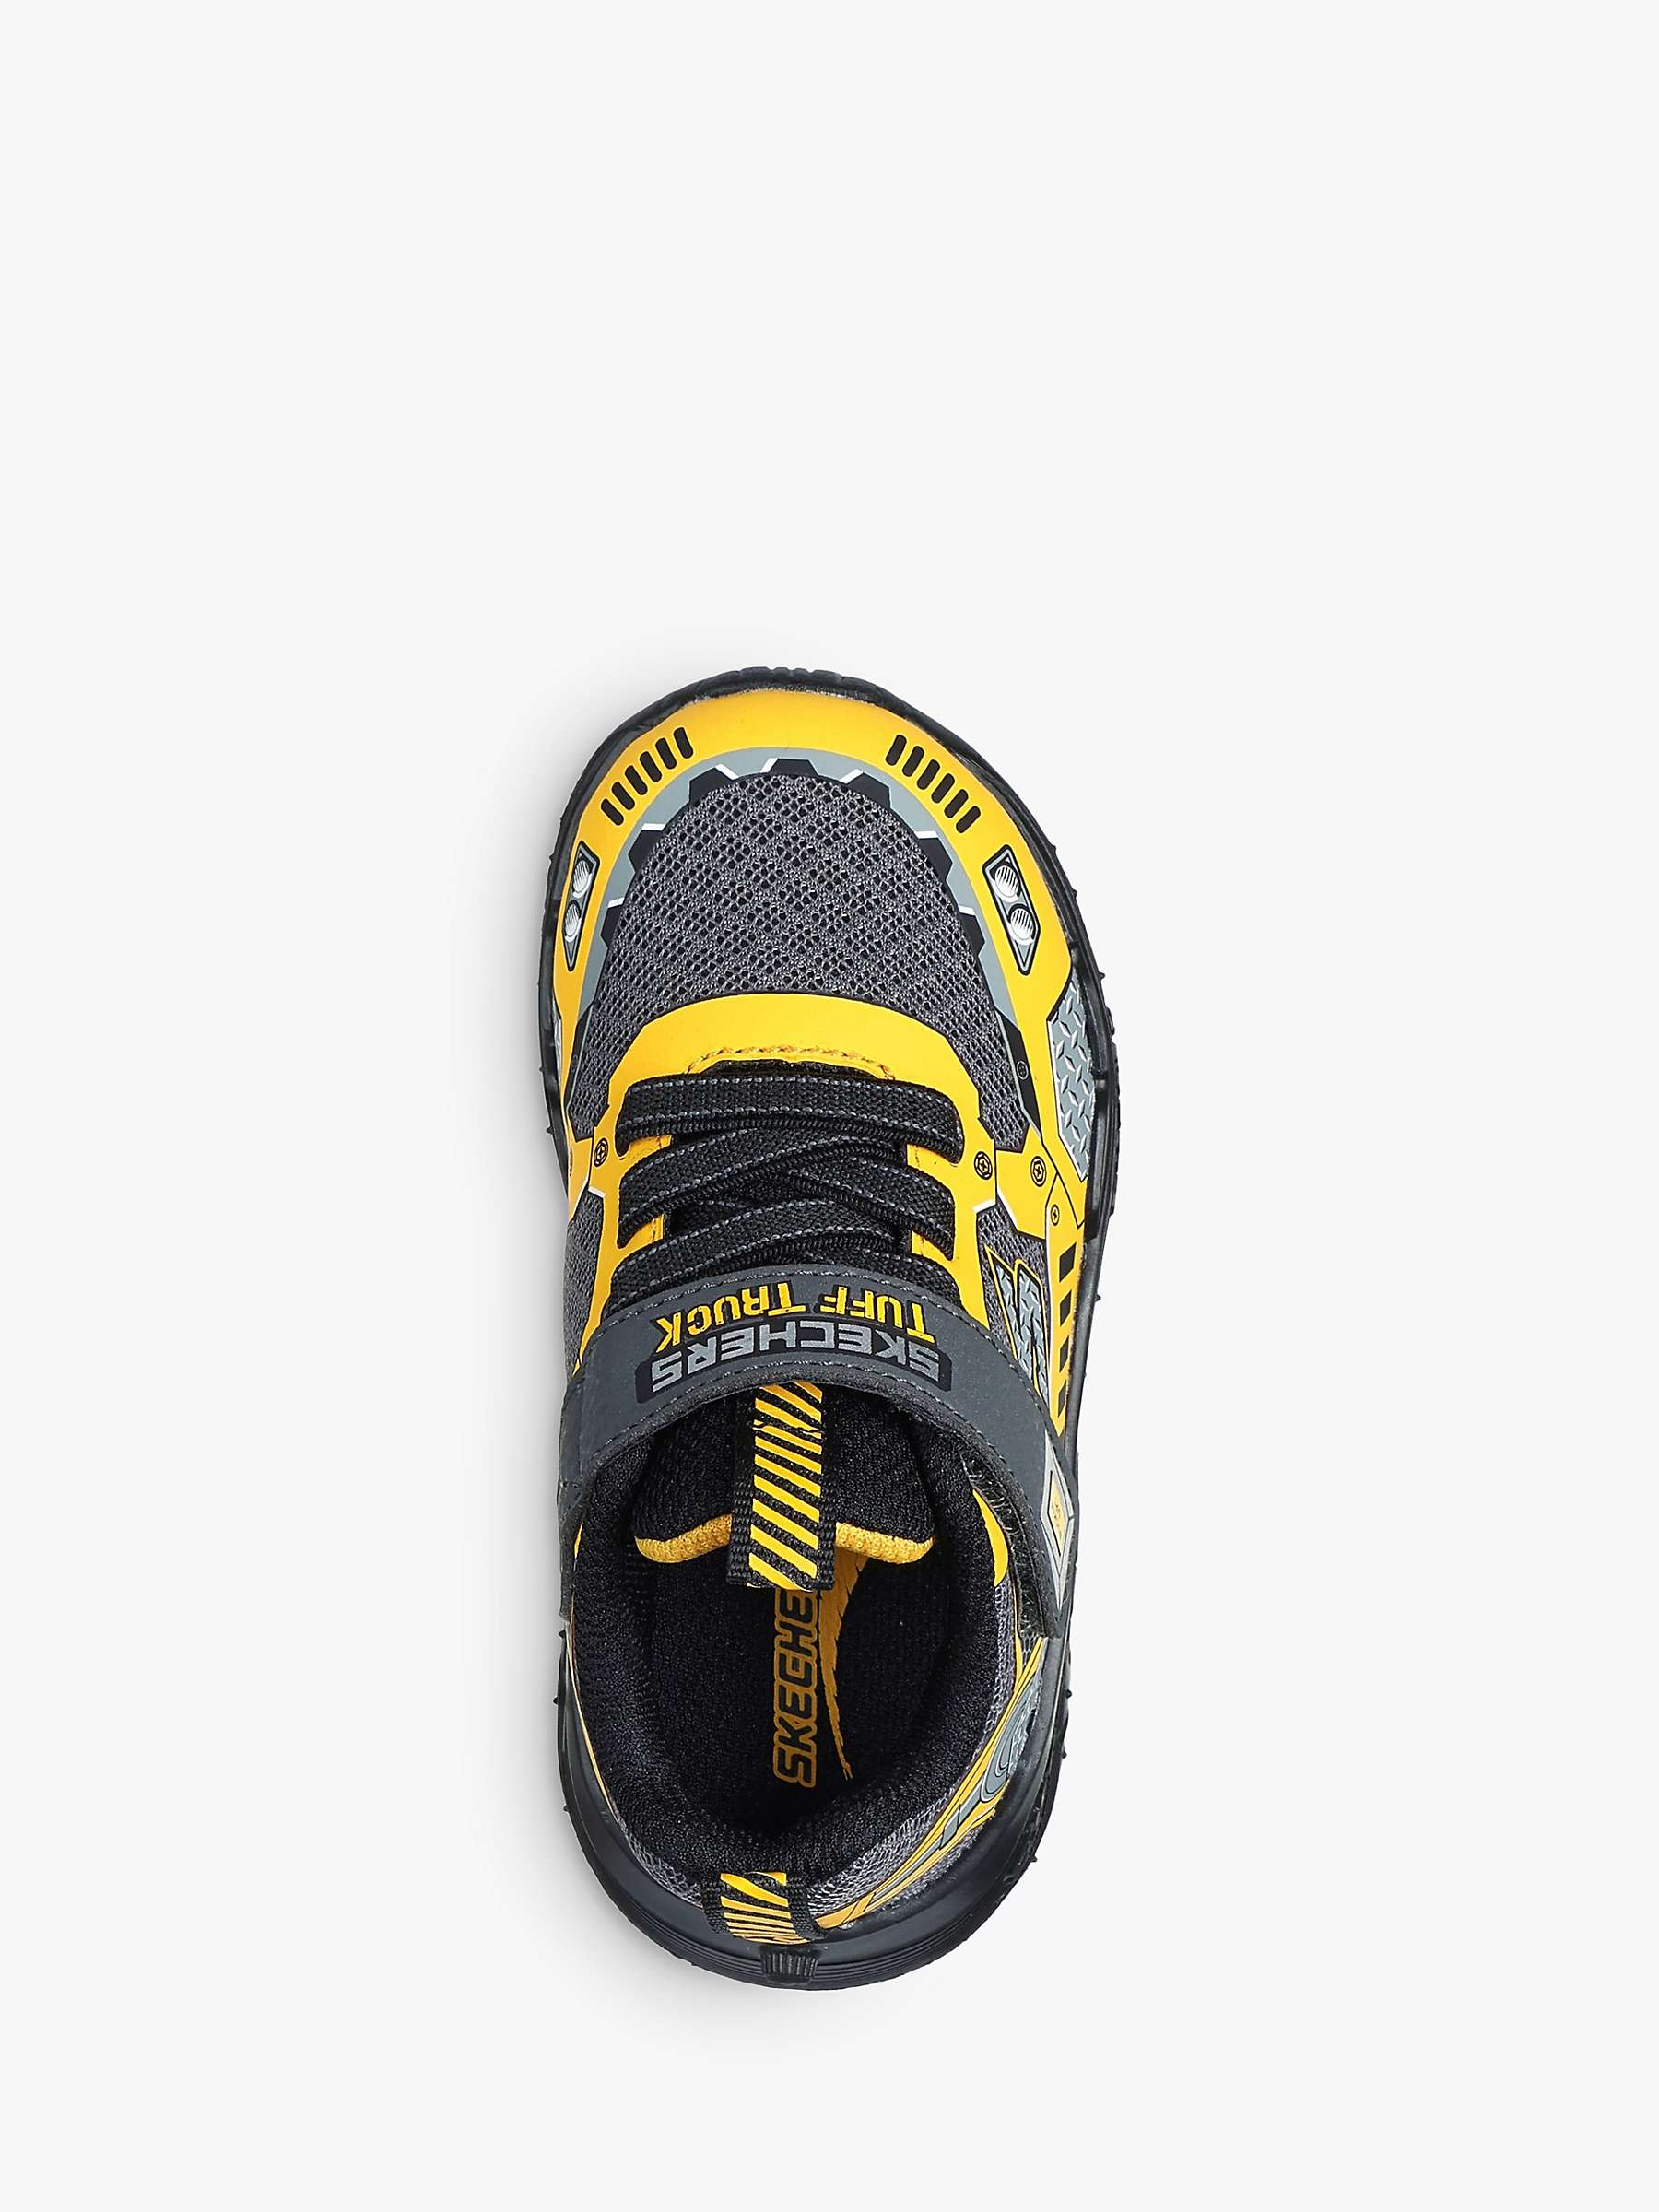 Buy Skechers Kids' Skech Tracks Trainers, Yellow/Charcoal Online at johnlewis.com